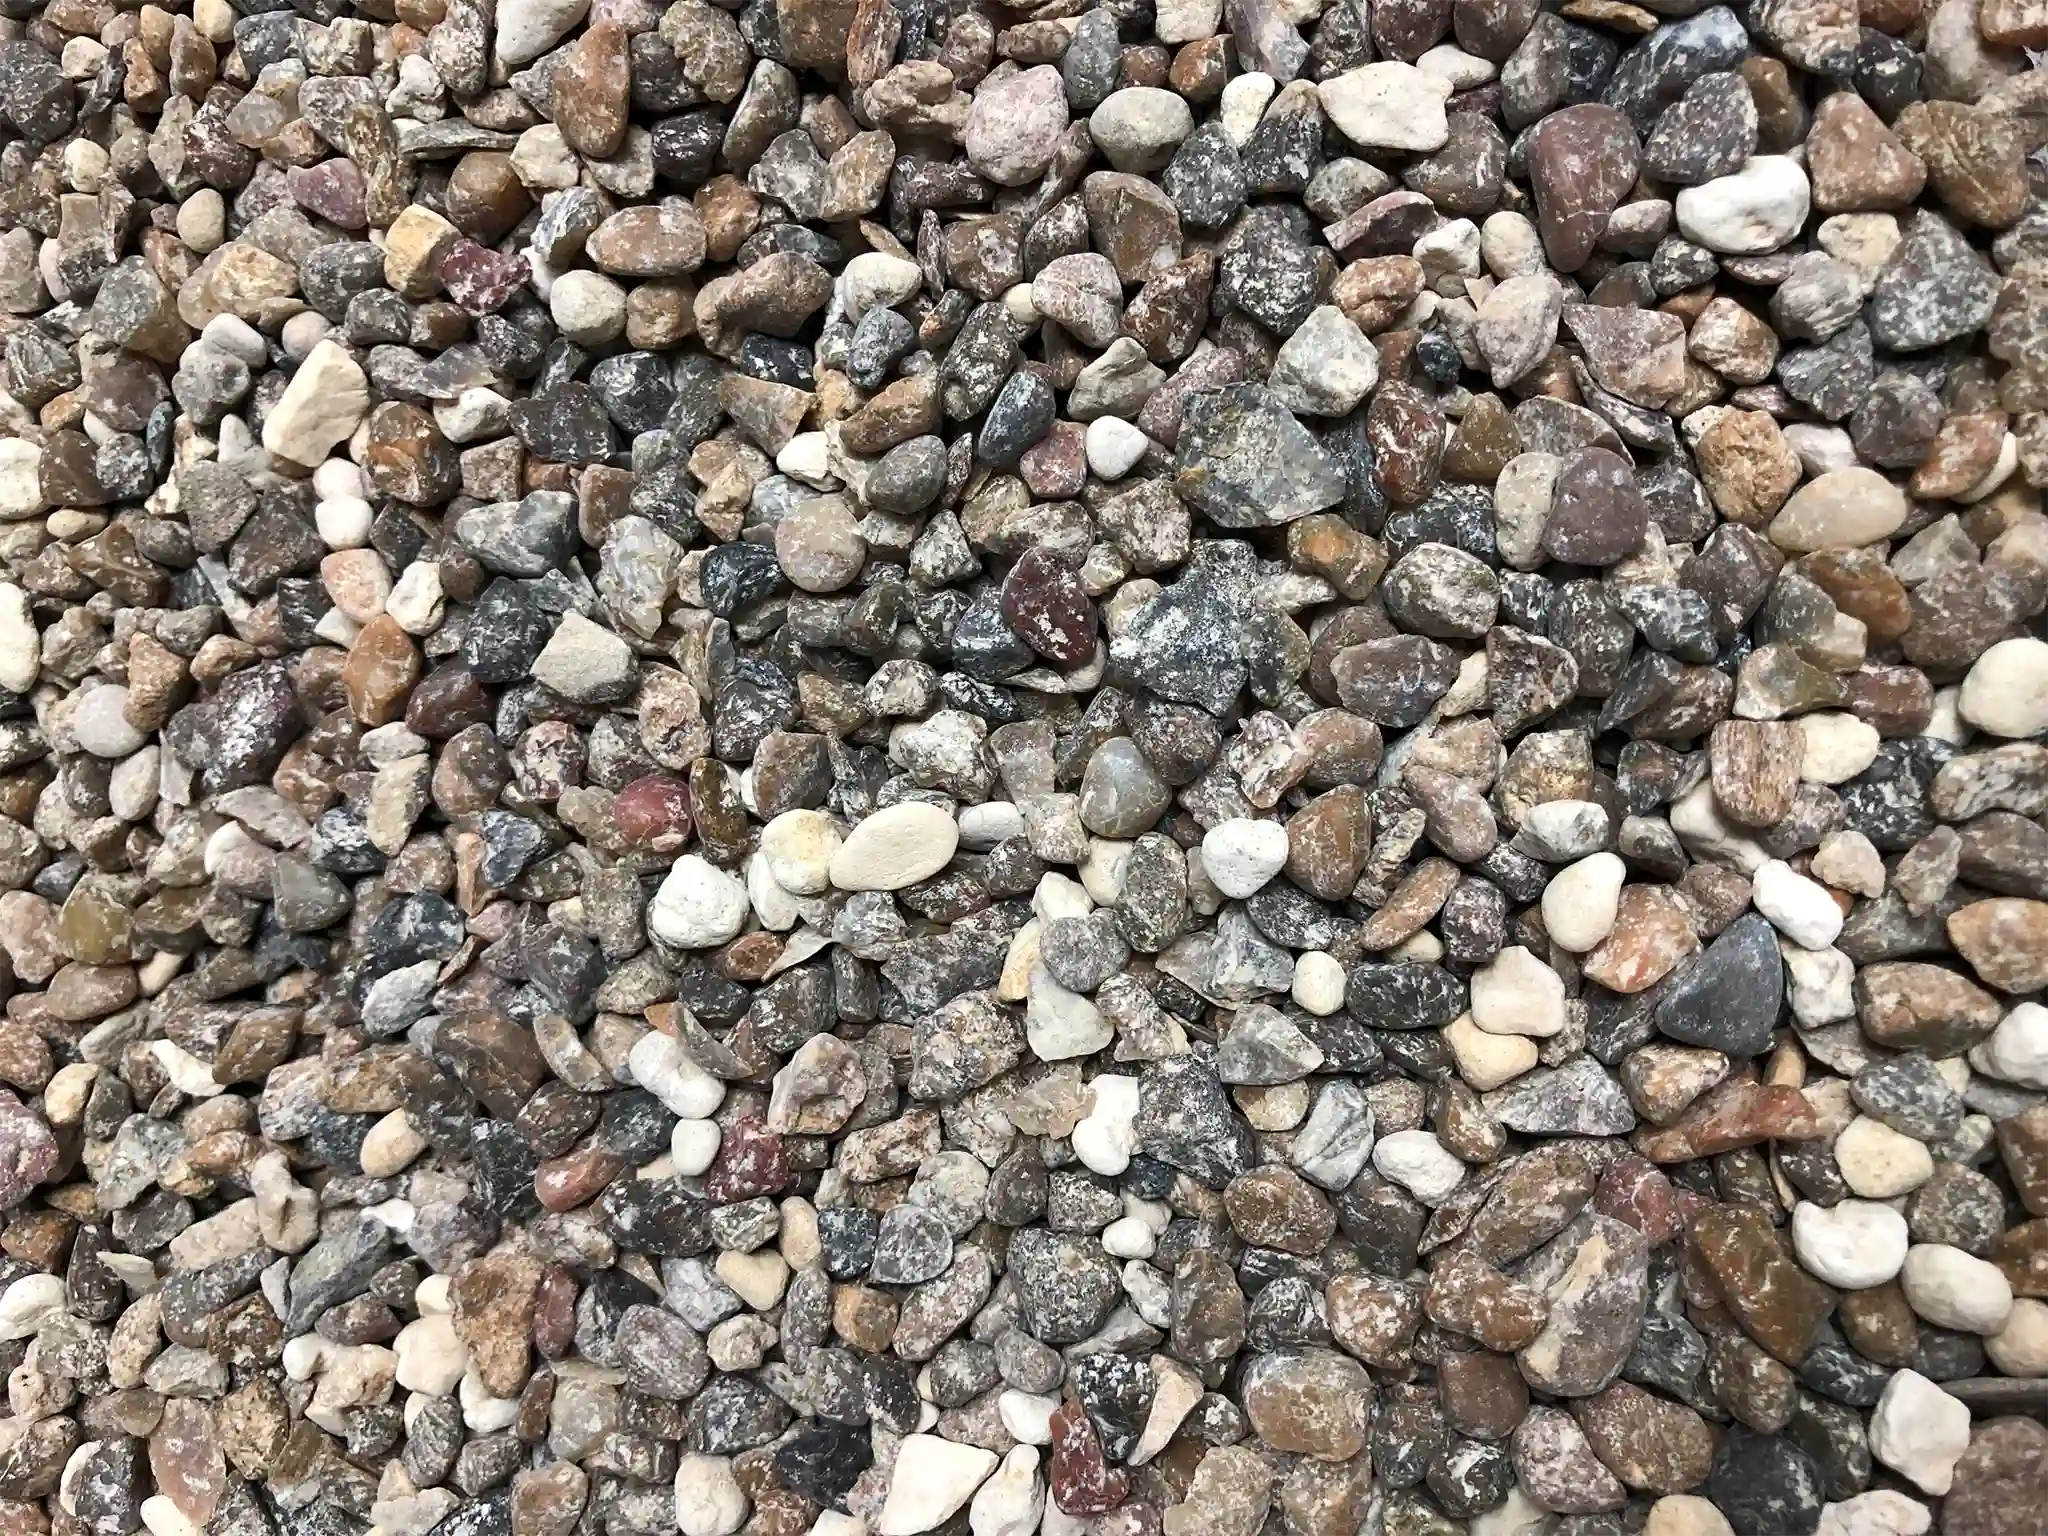 A close-up view of pea gravel.